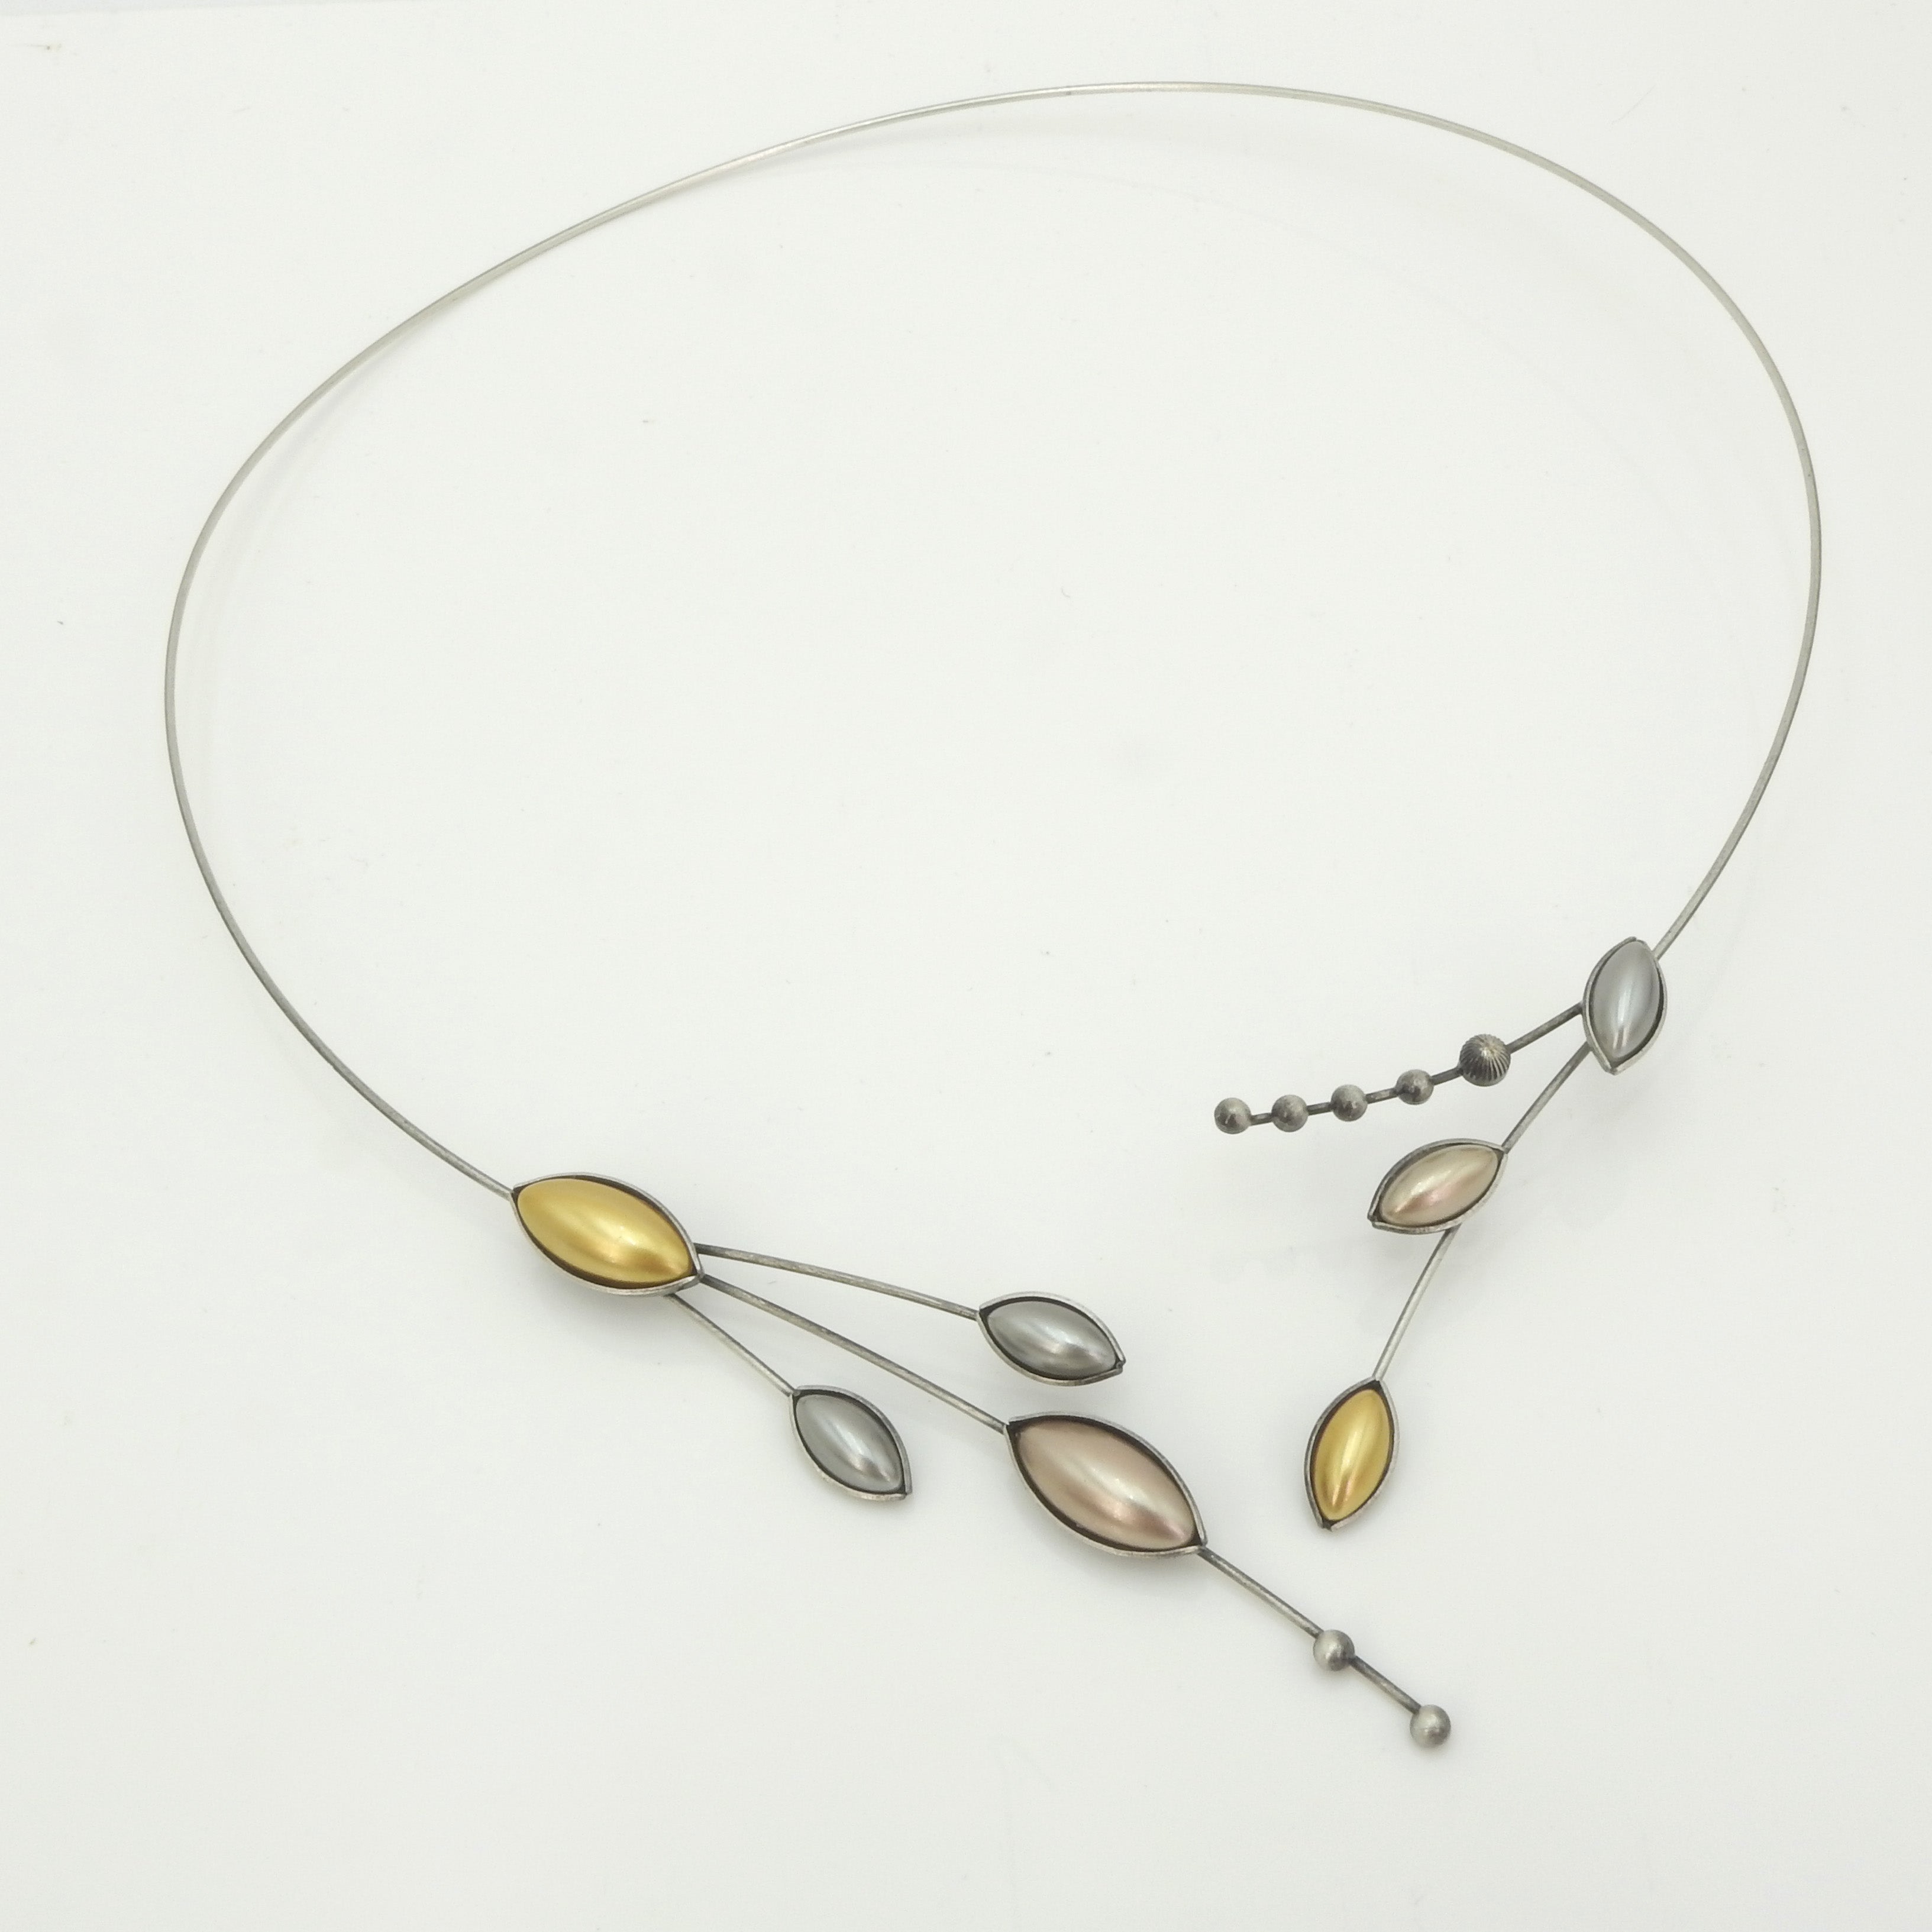 Jewellery Memory Wire Necklace 115x0.6 mm color silver -50 turns ~ 45 grams  ✓Top Price 1.38 |emart.eu